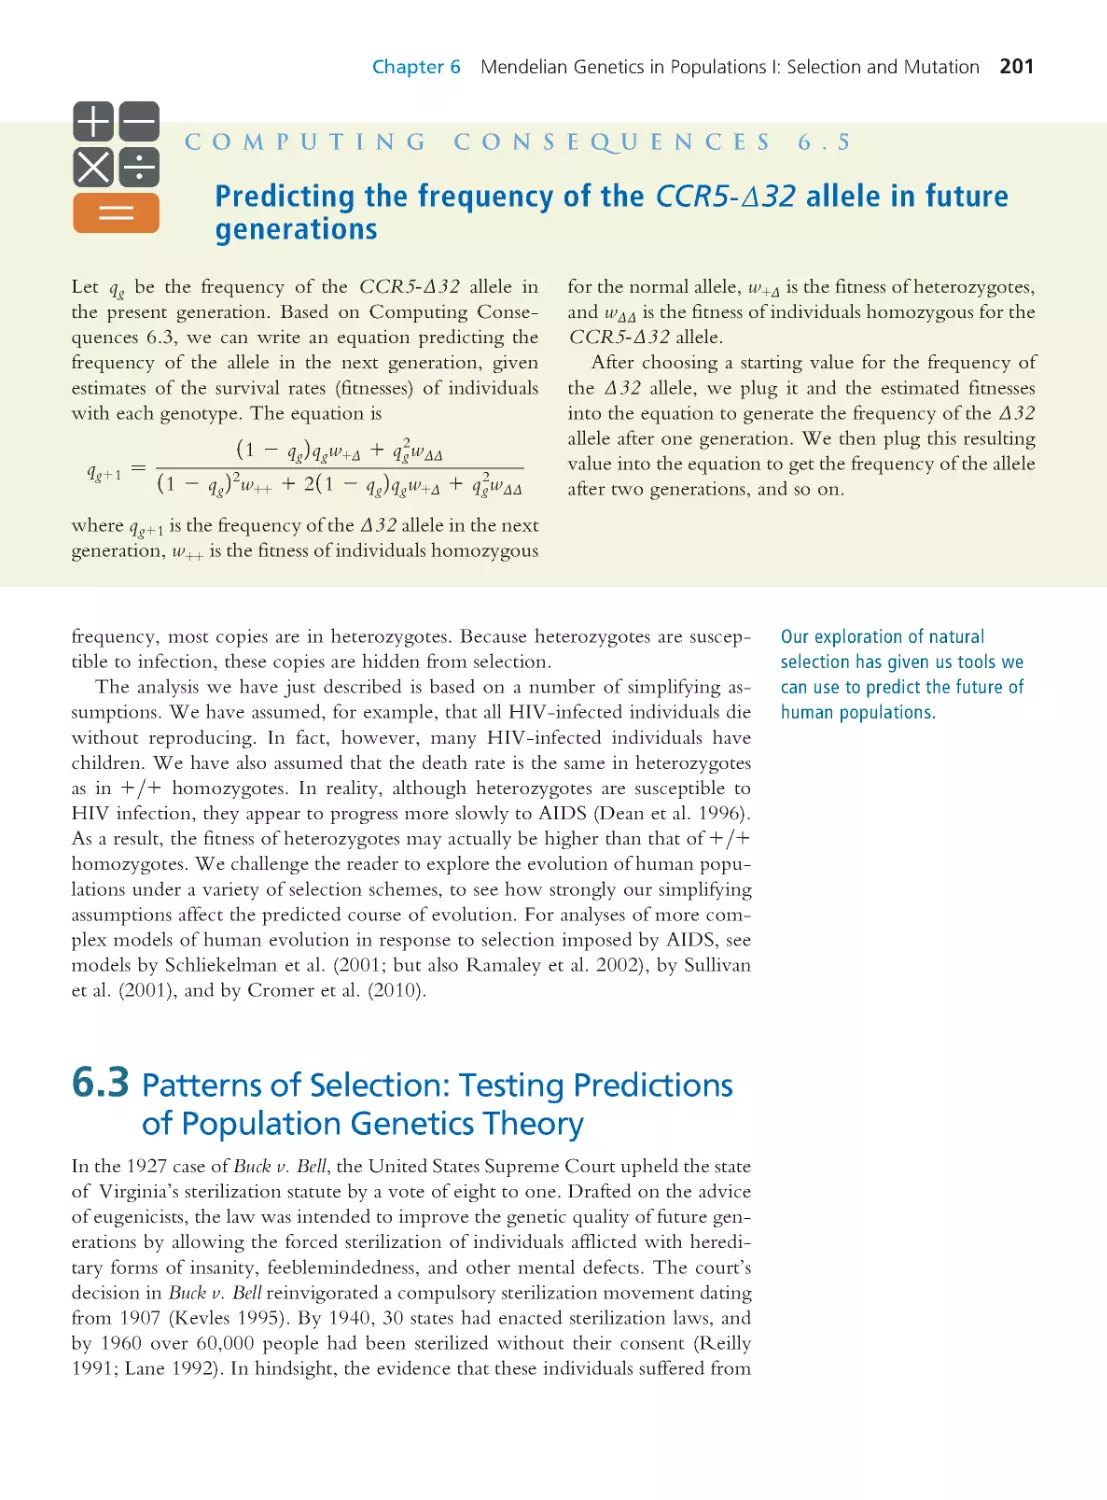 Computing Consequences 6.5 Predicting the frequency of the CCR5-Δ32 allele in future generations
6.3 Patterns of Selection: Testing Predictions of Population Genetics Theory